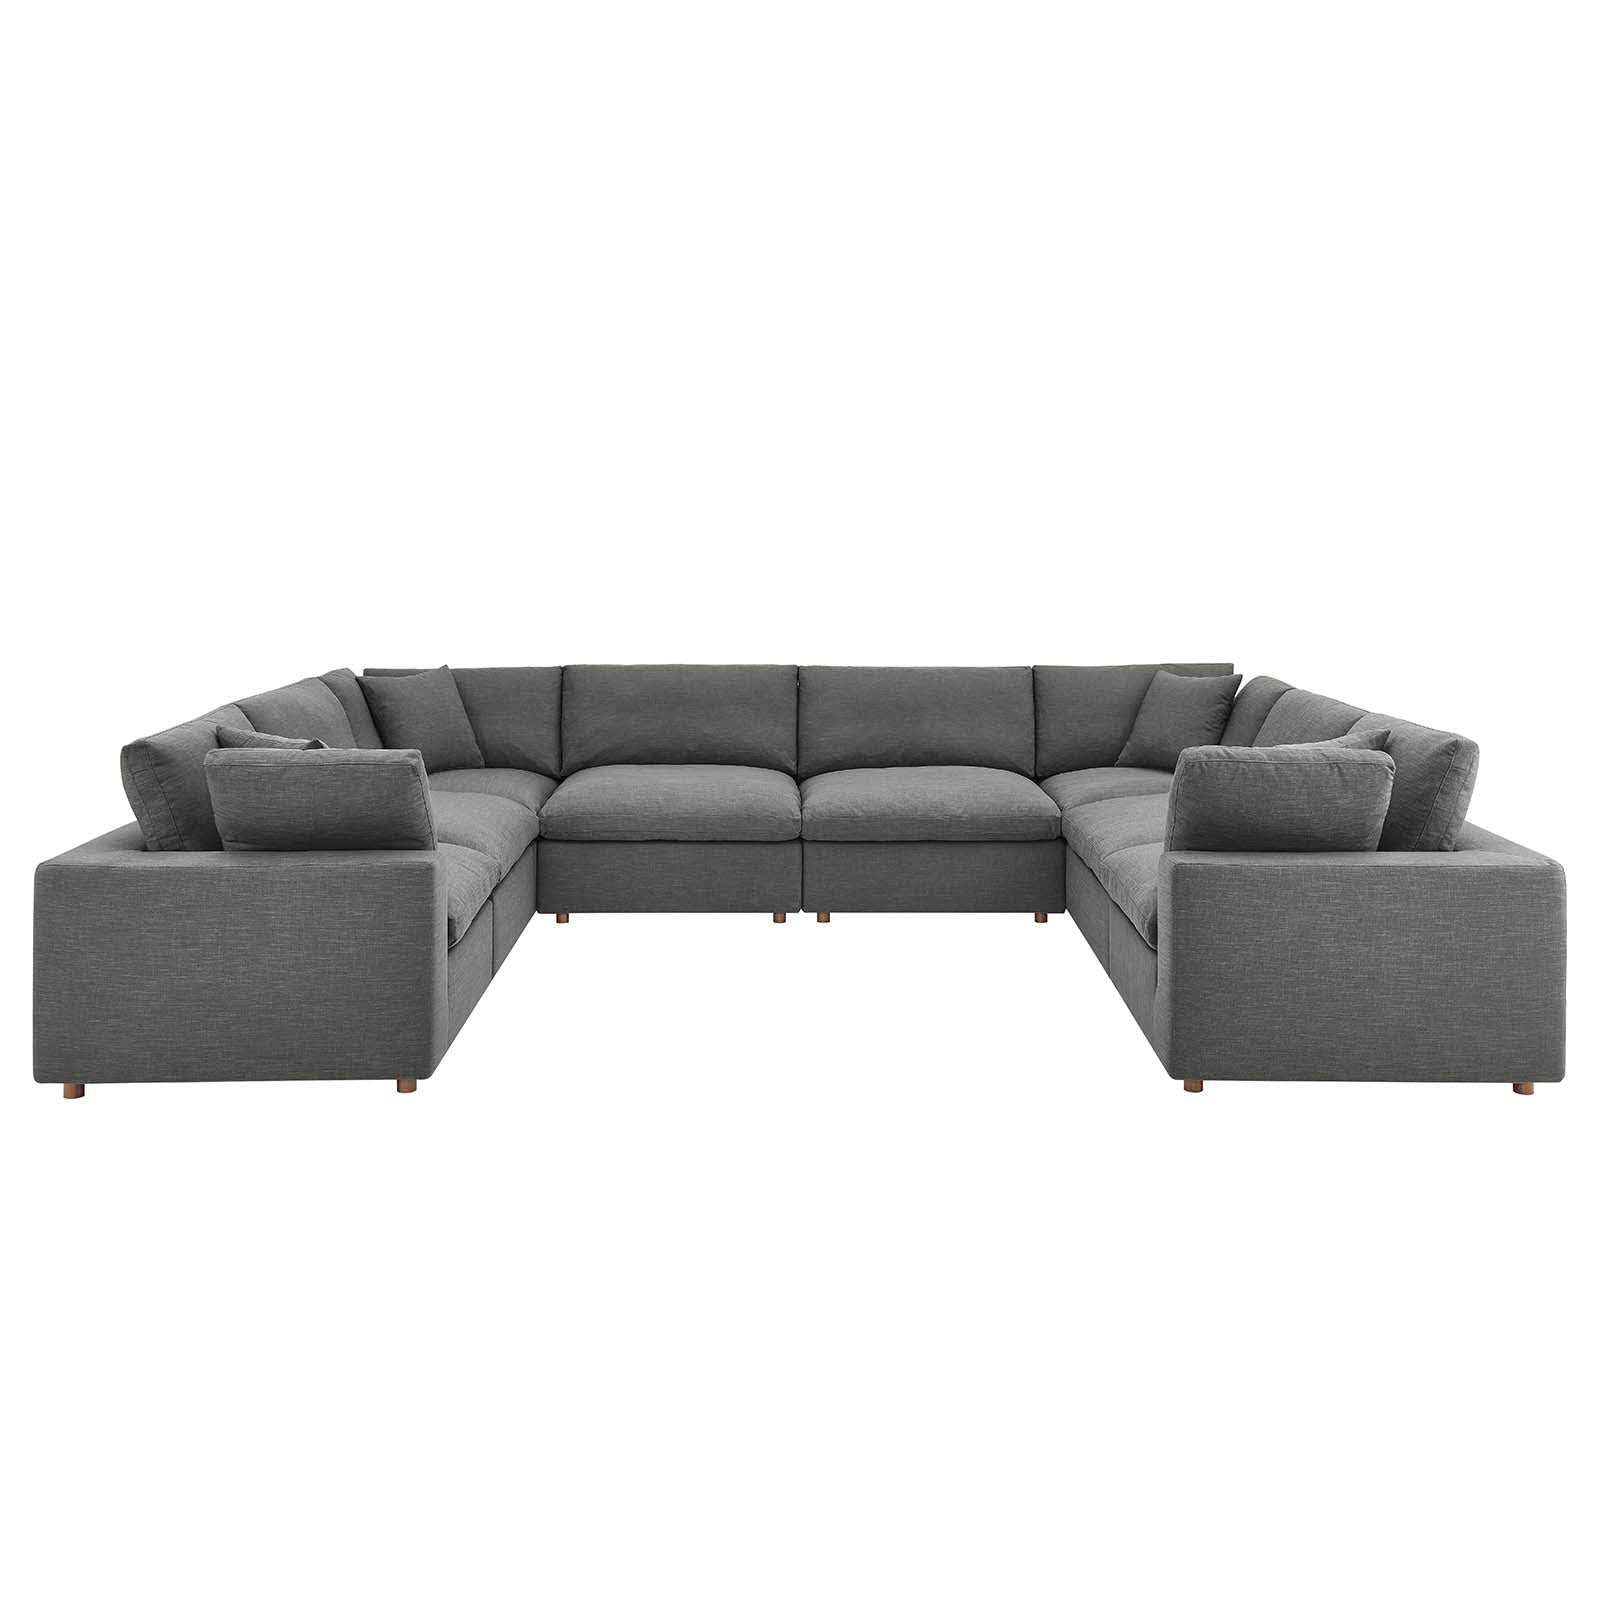 Modway Living Room Sets - Commix Down Filled Overstuffed 8 Piece Sectional Sofa Set Gray